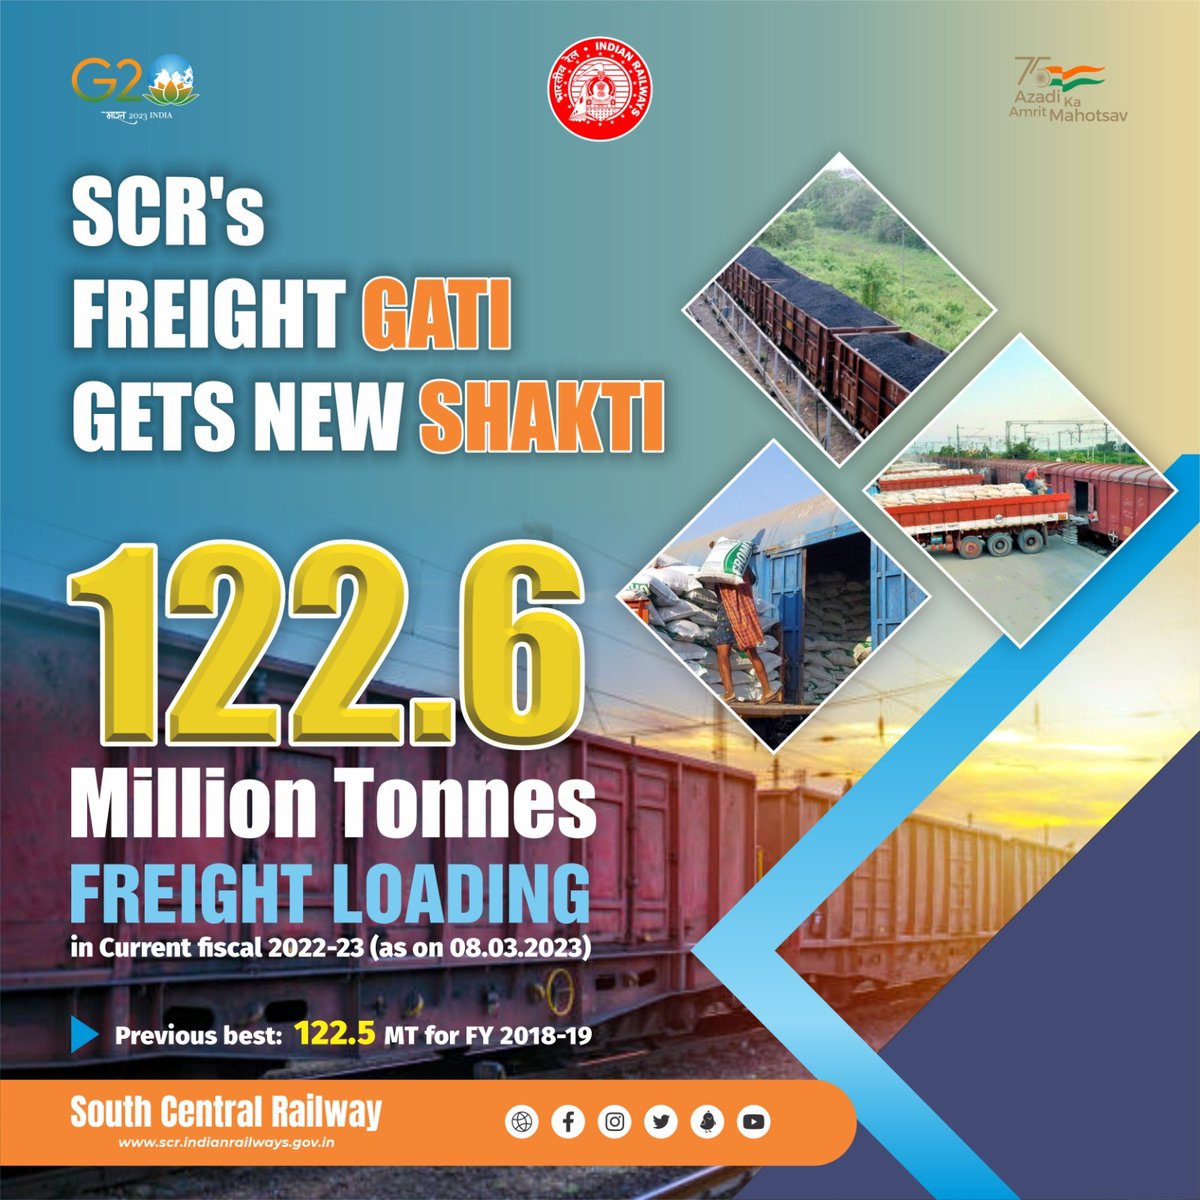 SCR's Freight Gati Gets New Shakti Zone creates history by surpassing its best-ever #freight loading of 122.5 MTs in FY 18-19 Till 8th Mar, SCR's loading stood @122.6 MTs in FY 22-23,reflecting the upswing in growth trajectory of freight business @RailMinIndia #HungryForCargo